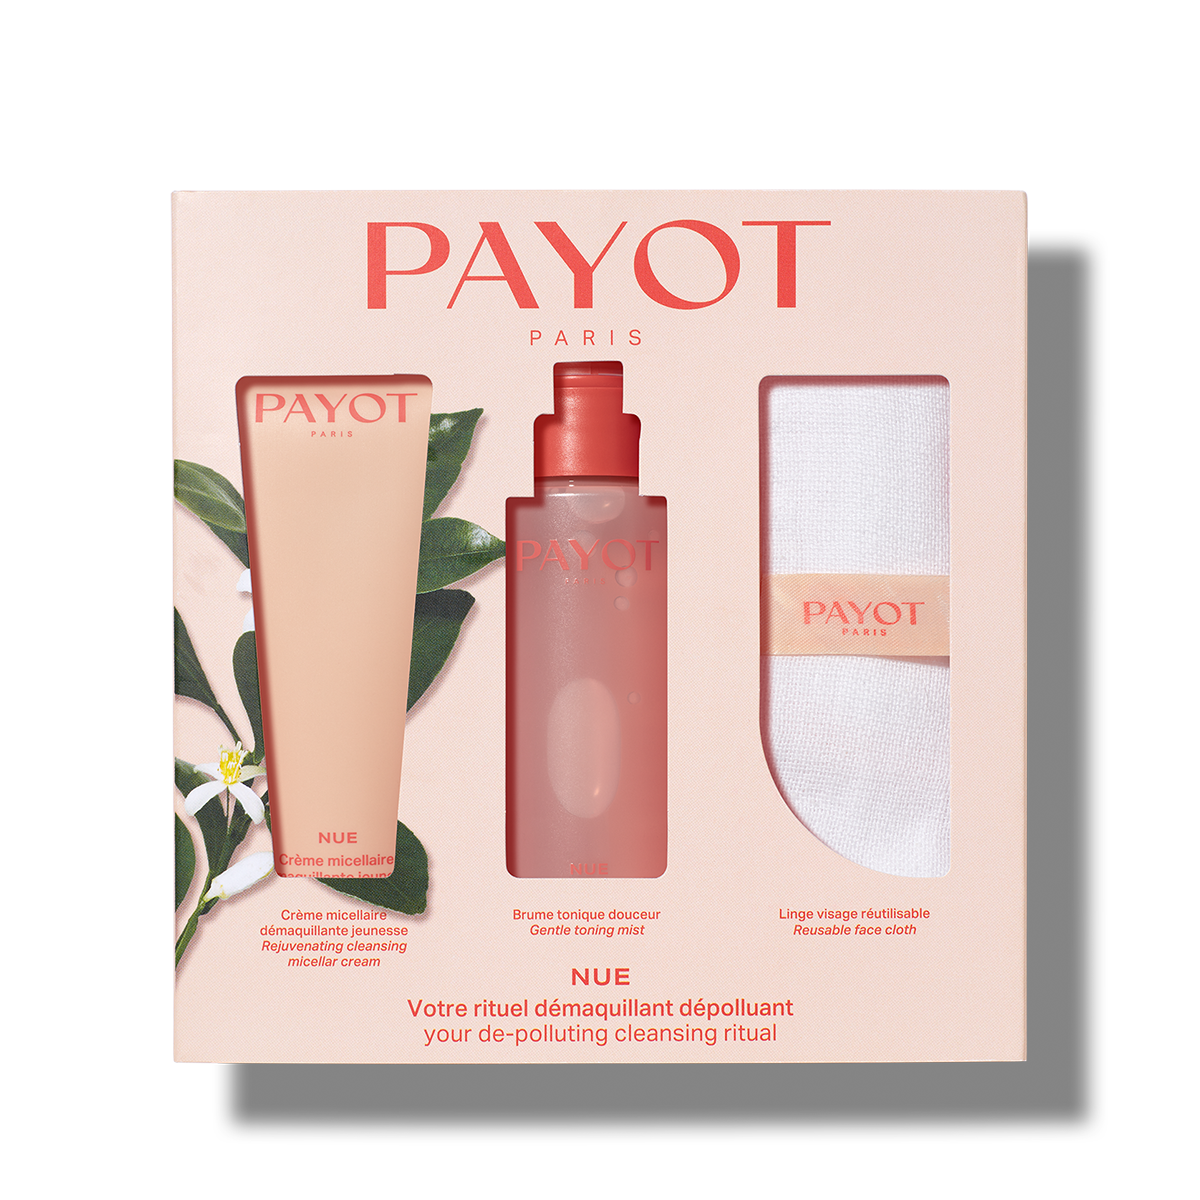 Payot Nue Launch Box